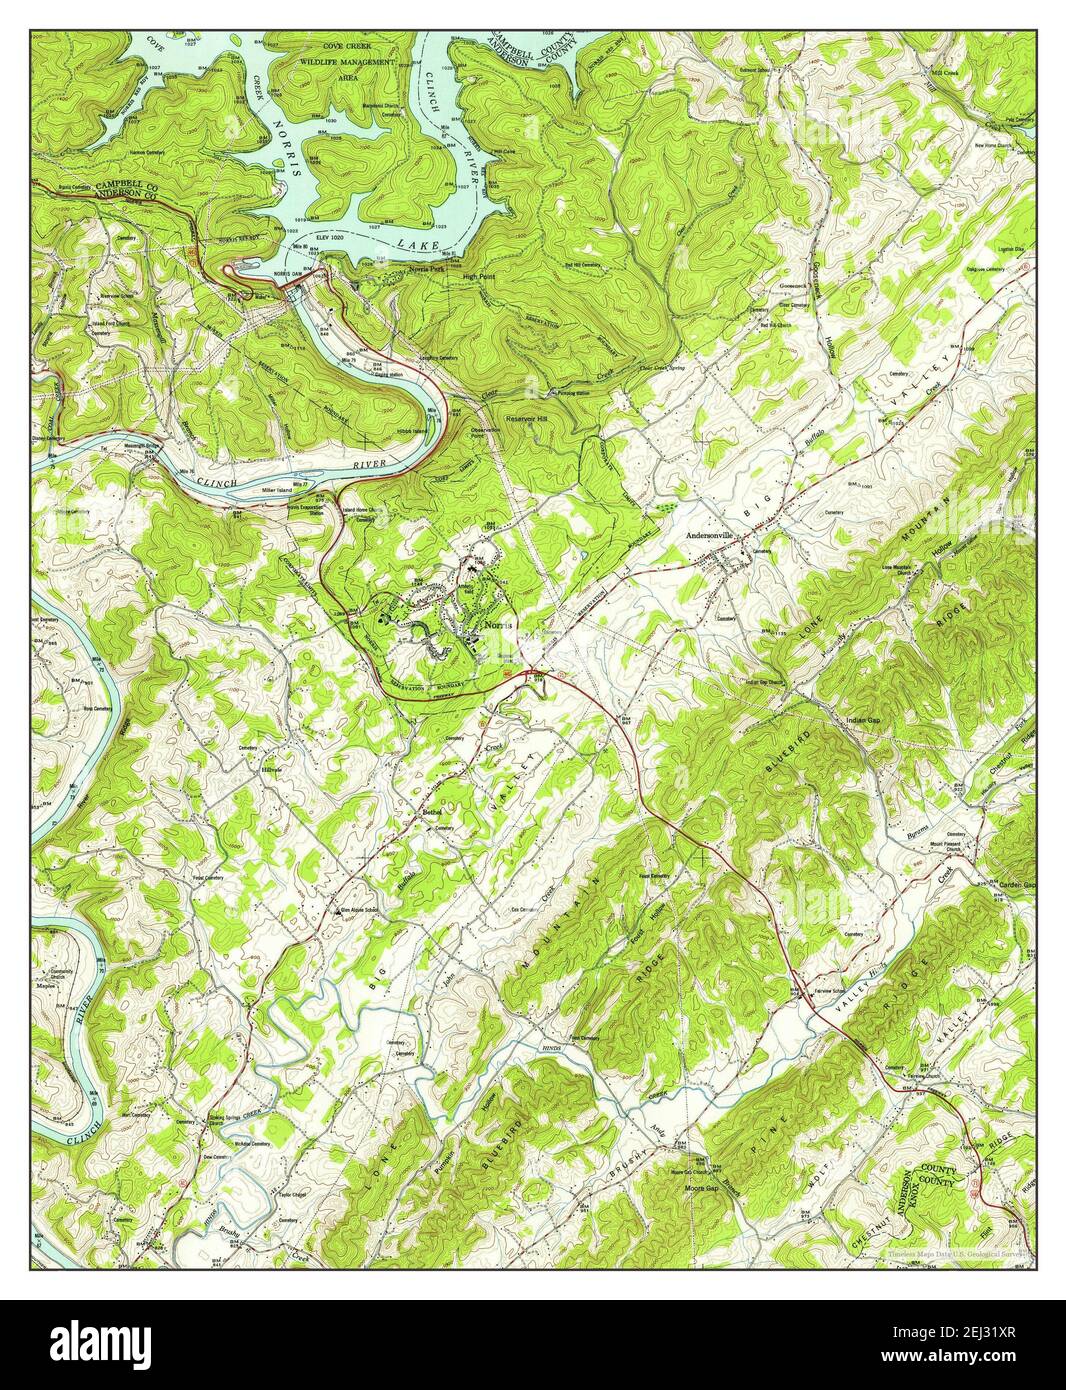 Norris, Tennessee, map 1952, 1:24000, United States of America by Timeless Maps, data U.S. Geological Survey Stock Photo